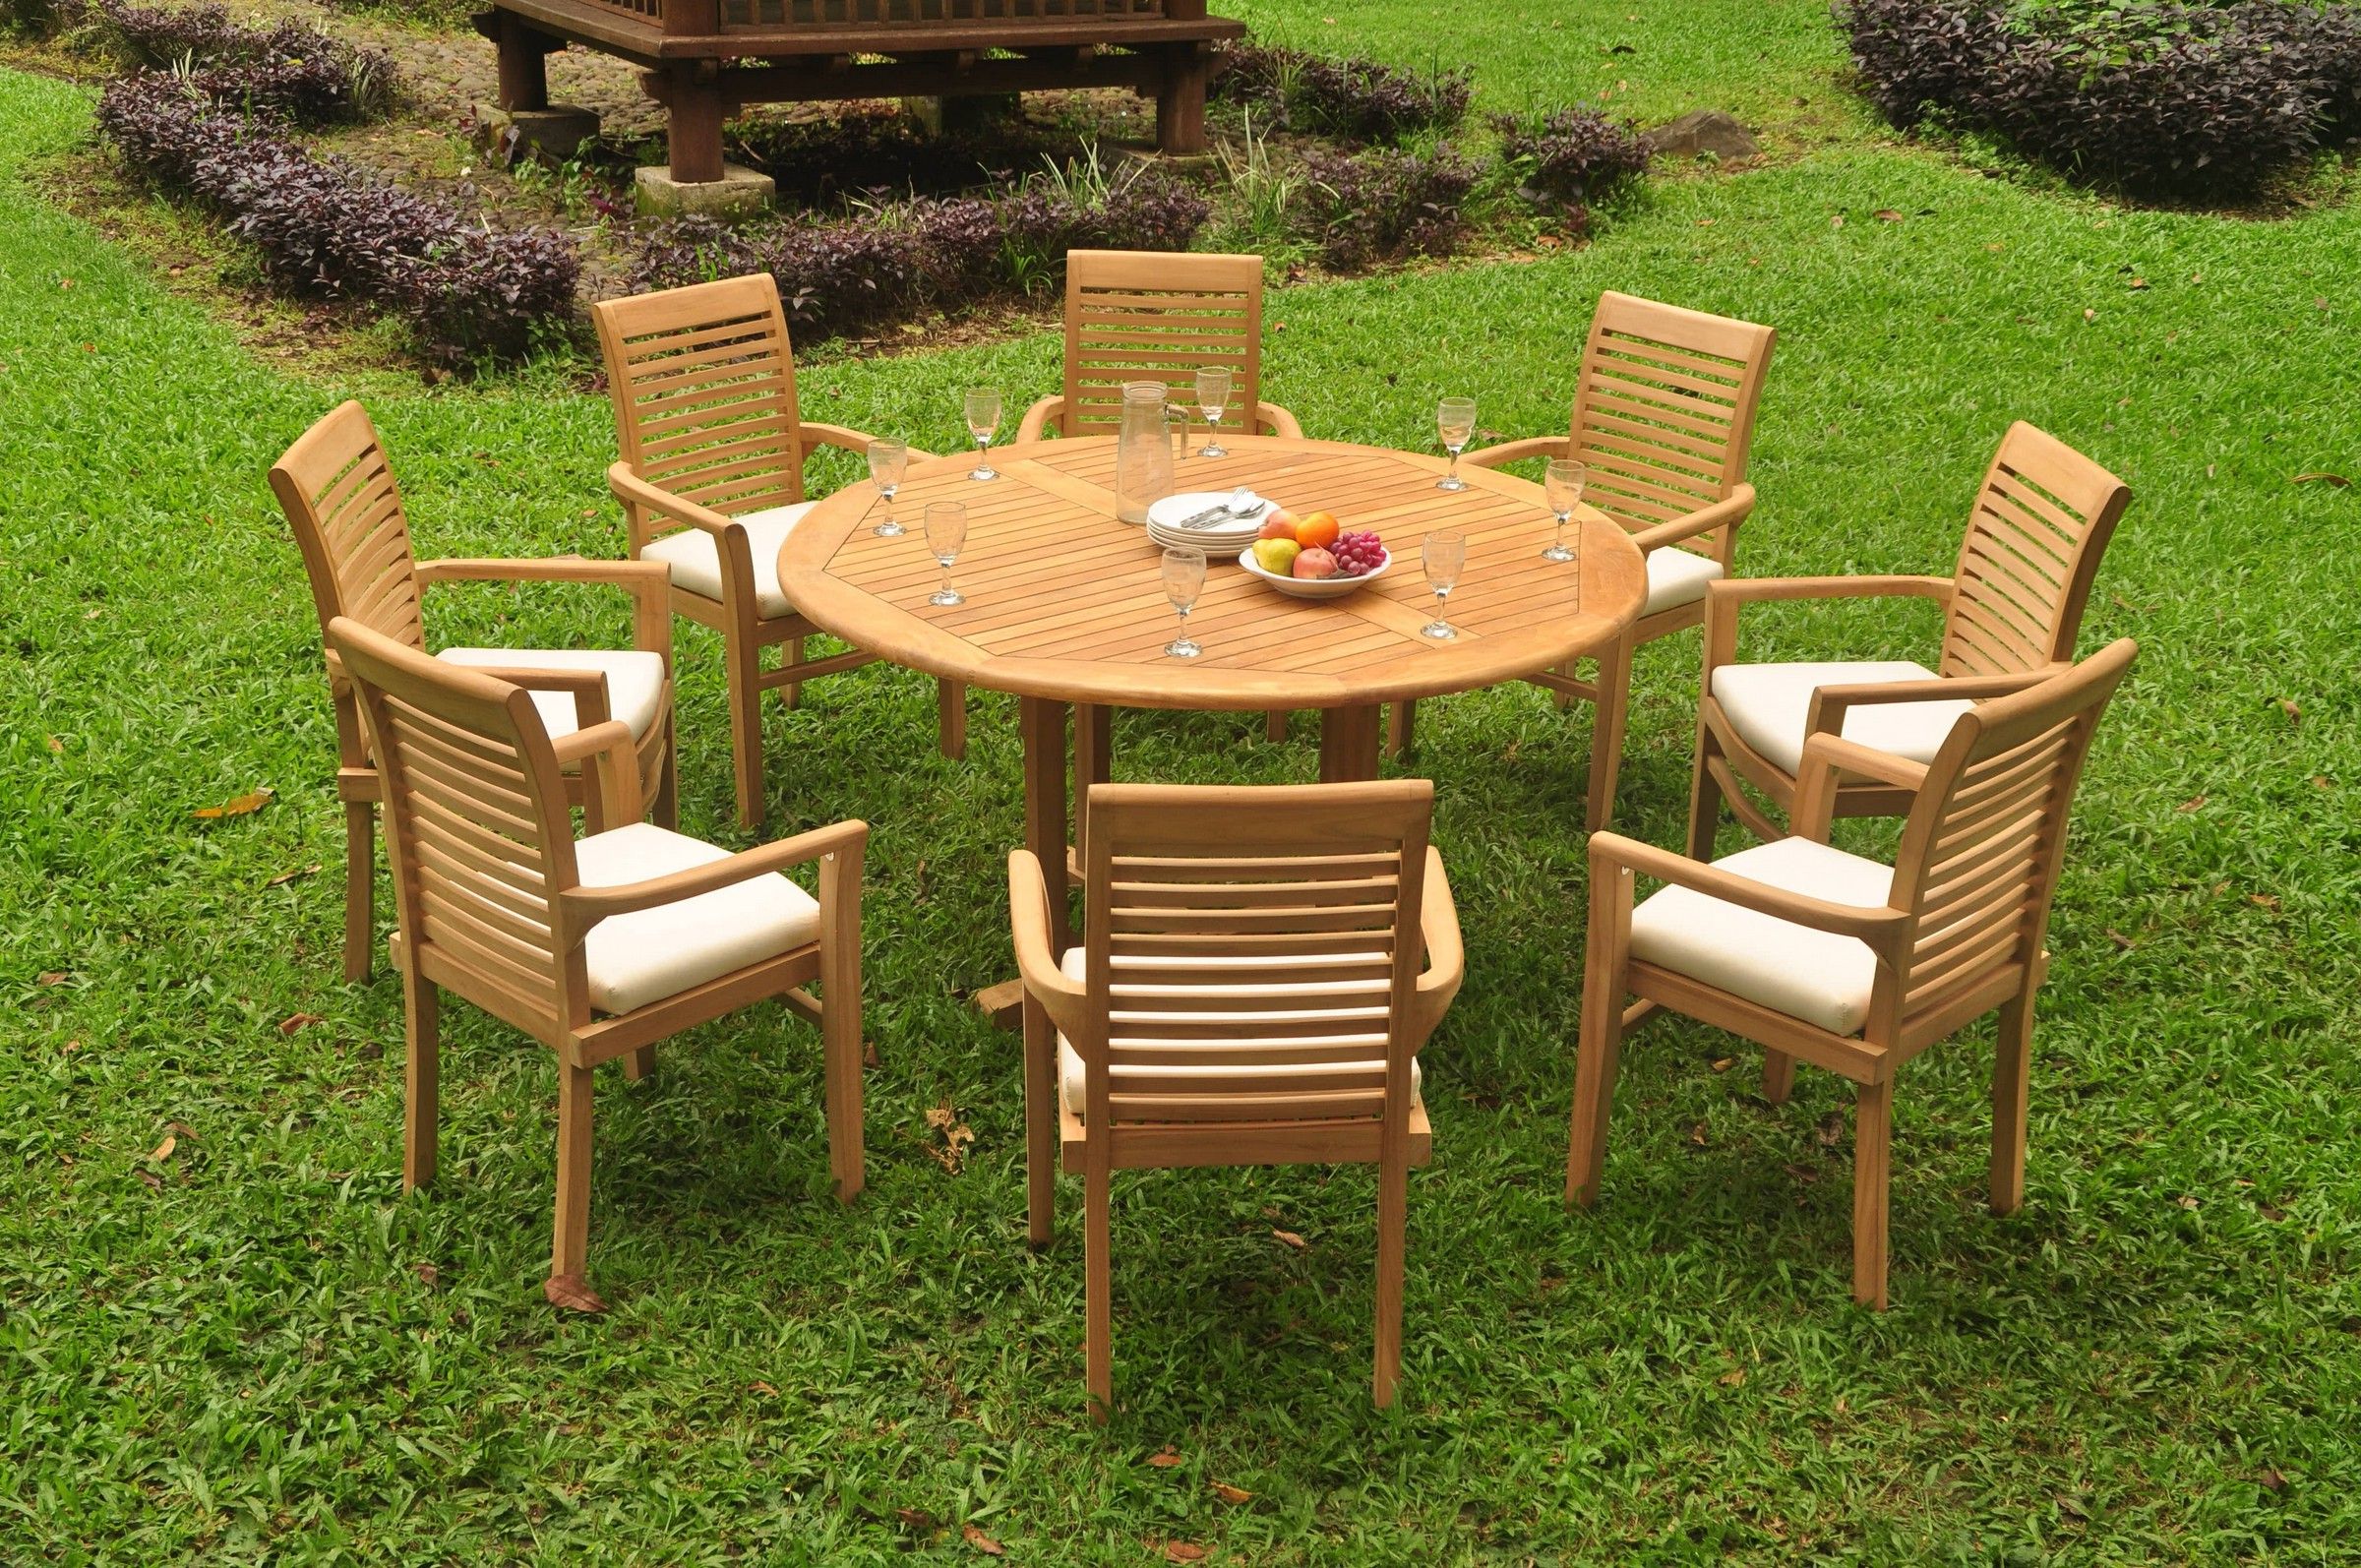 A Grade Teak 9pc Dining 60" Round Table 8 Mas Stacking Arm Chair Set Intended For Most Recent Teak Armchair Round Patio Dining Sets (View 3 of 15)